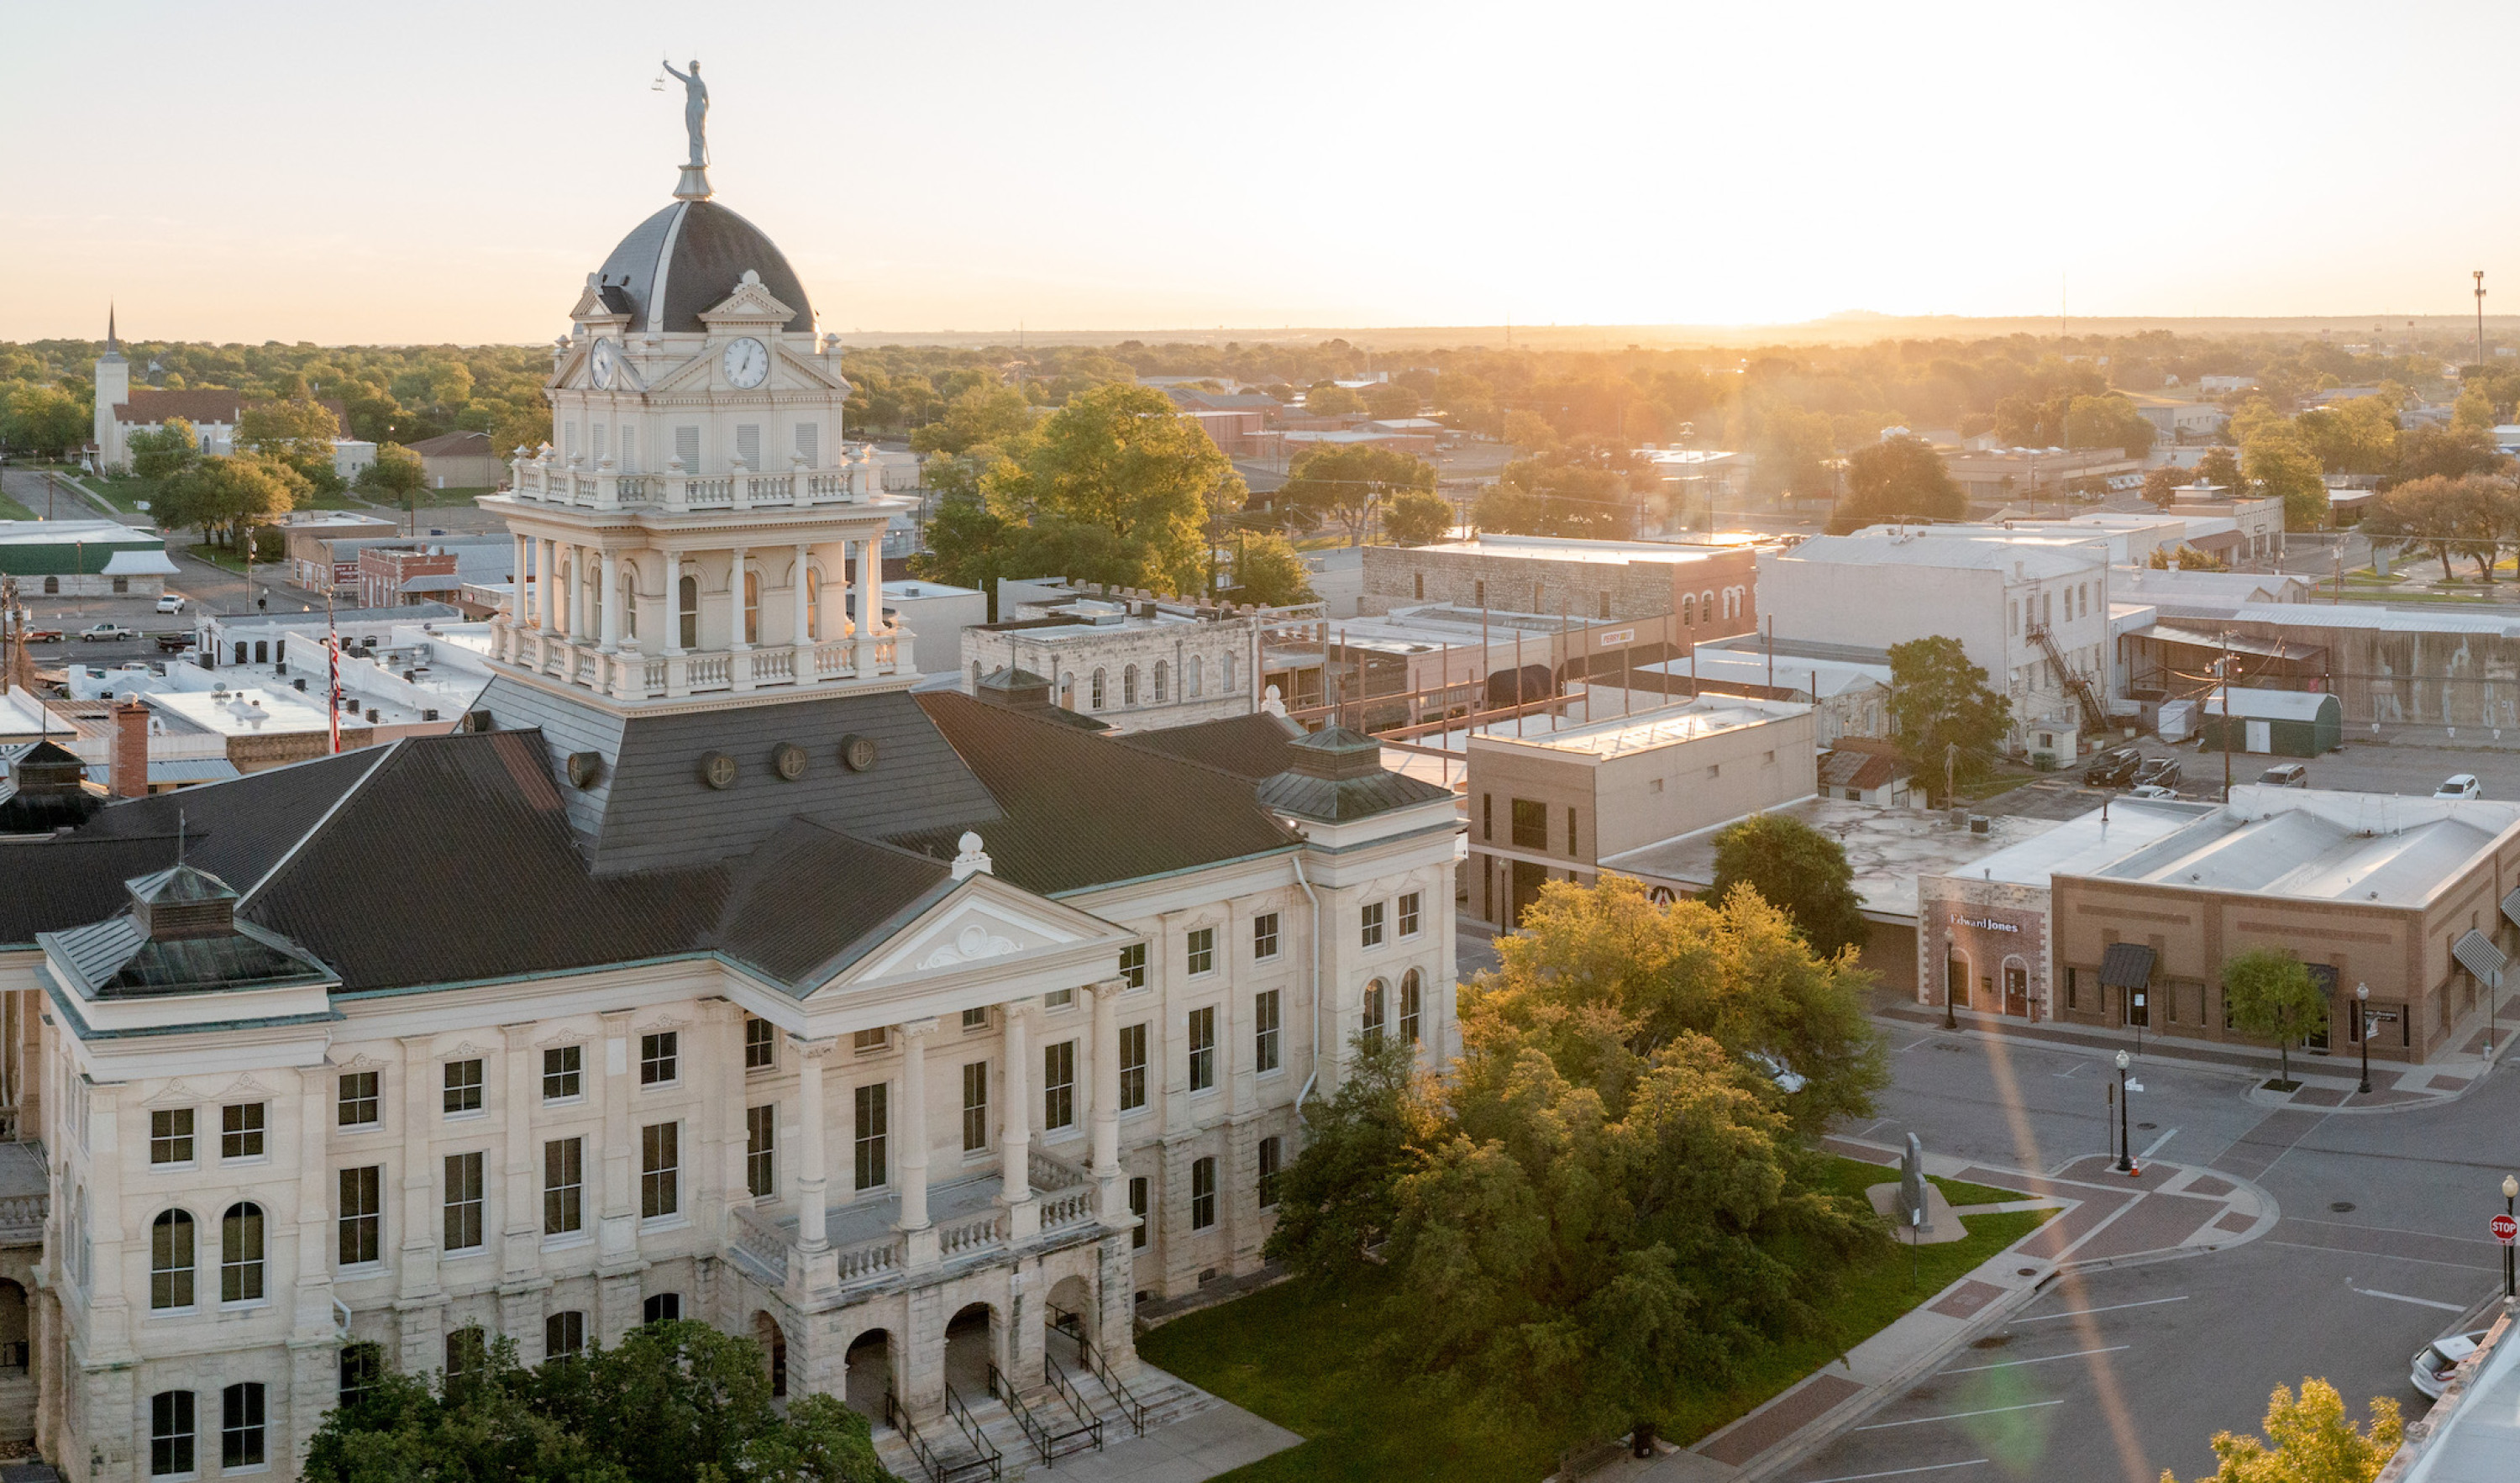 Aerial view of courthouse with the sun rising in the background